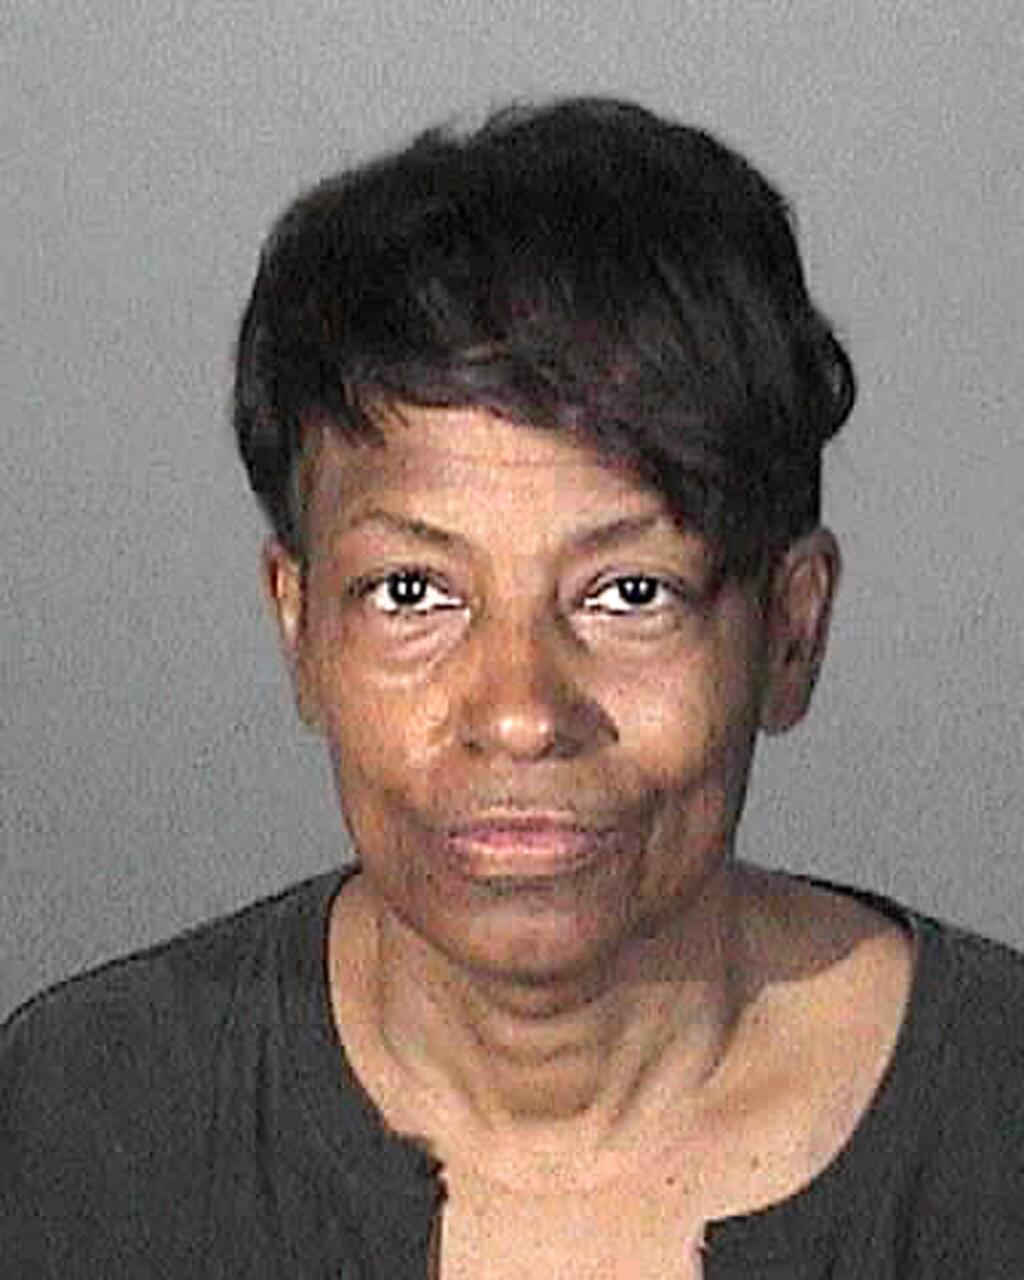 This April 30, 2015, booking photo provided by the Los Angeles County Sheriffs Department, shows Tonette Hayes, who was arrested on suspicion of impersonating a police officer through his role in an organization known as the Masonic Fraternal Police Department, sheriff's authorities said. Hayes and two others are accused of operating a rogue police force that claims to have been in existence for more than 3,000 years and has jurisdiction in 33 states and Mexico, authorities said Tuesday, May 5, 2015. (Los Angeles County Sheriffs Department via AP)